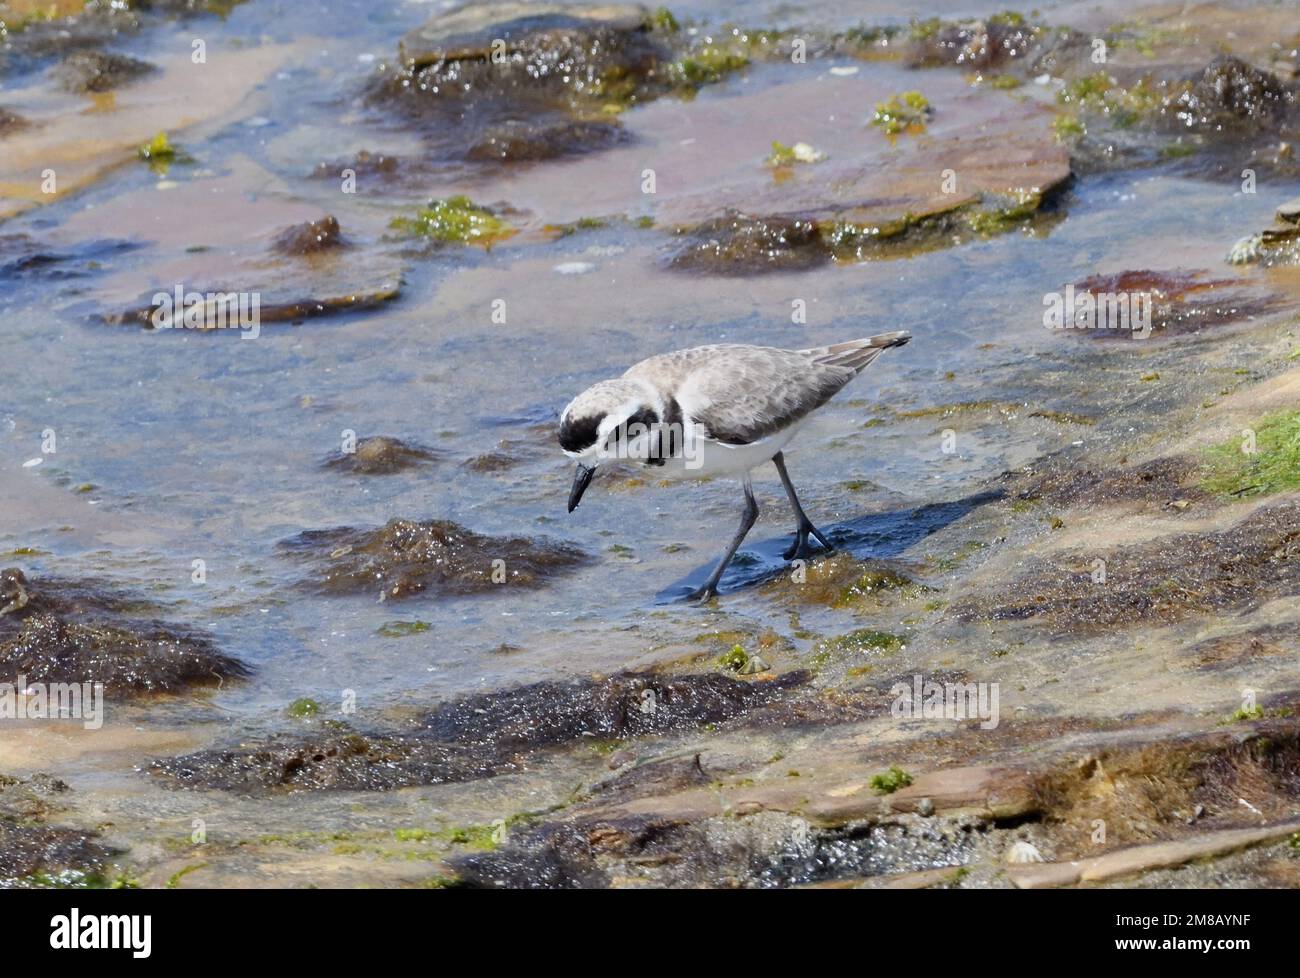 A male snowy plover (Charadrius nivosus) foraging for invertebrates along the beach in the Paracas National Reserve. Paracas, Ica, Peru. Stock Photo